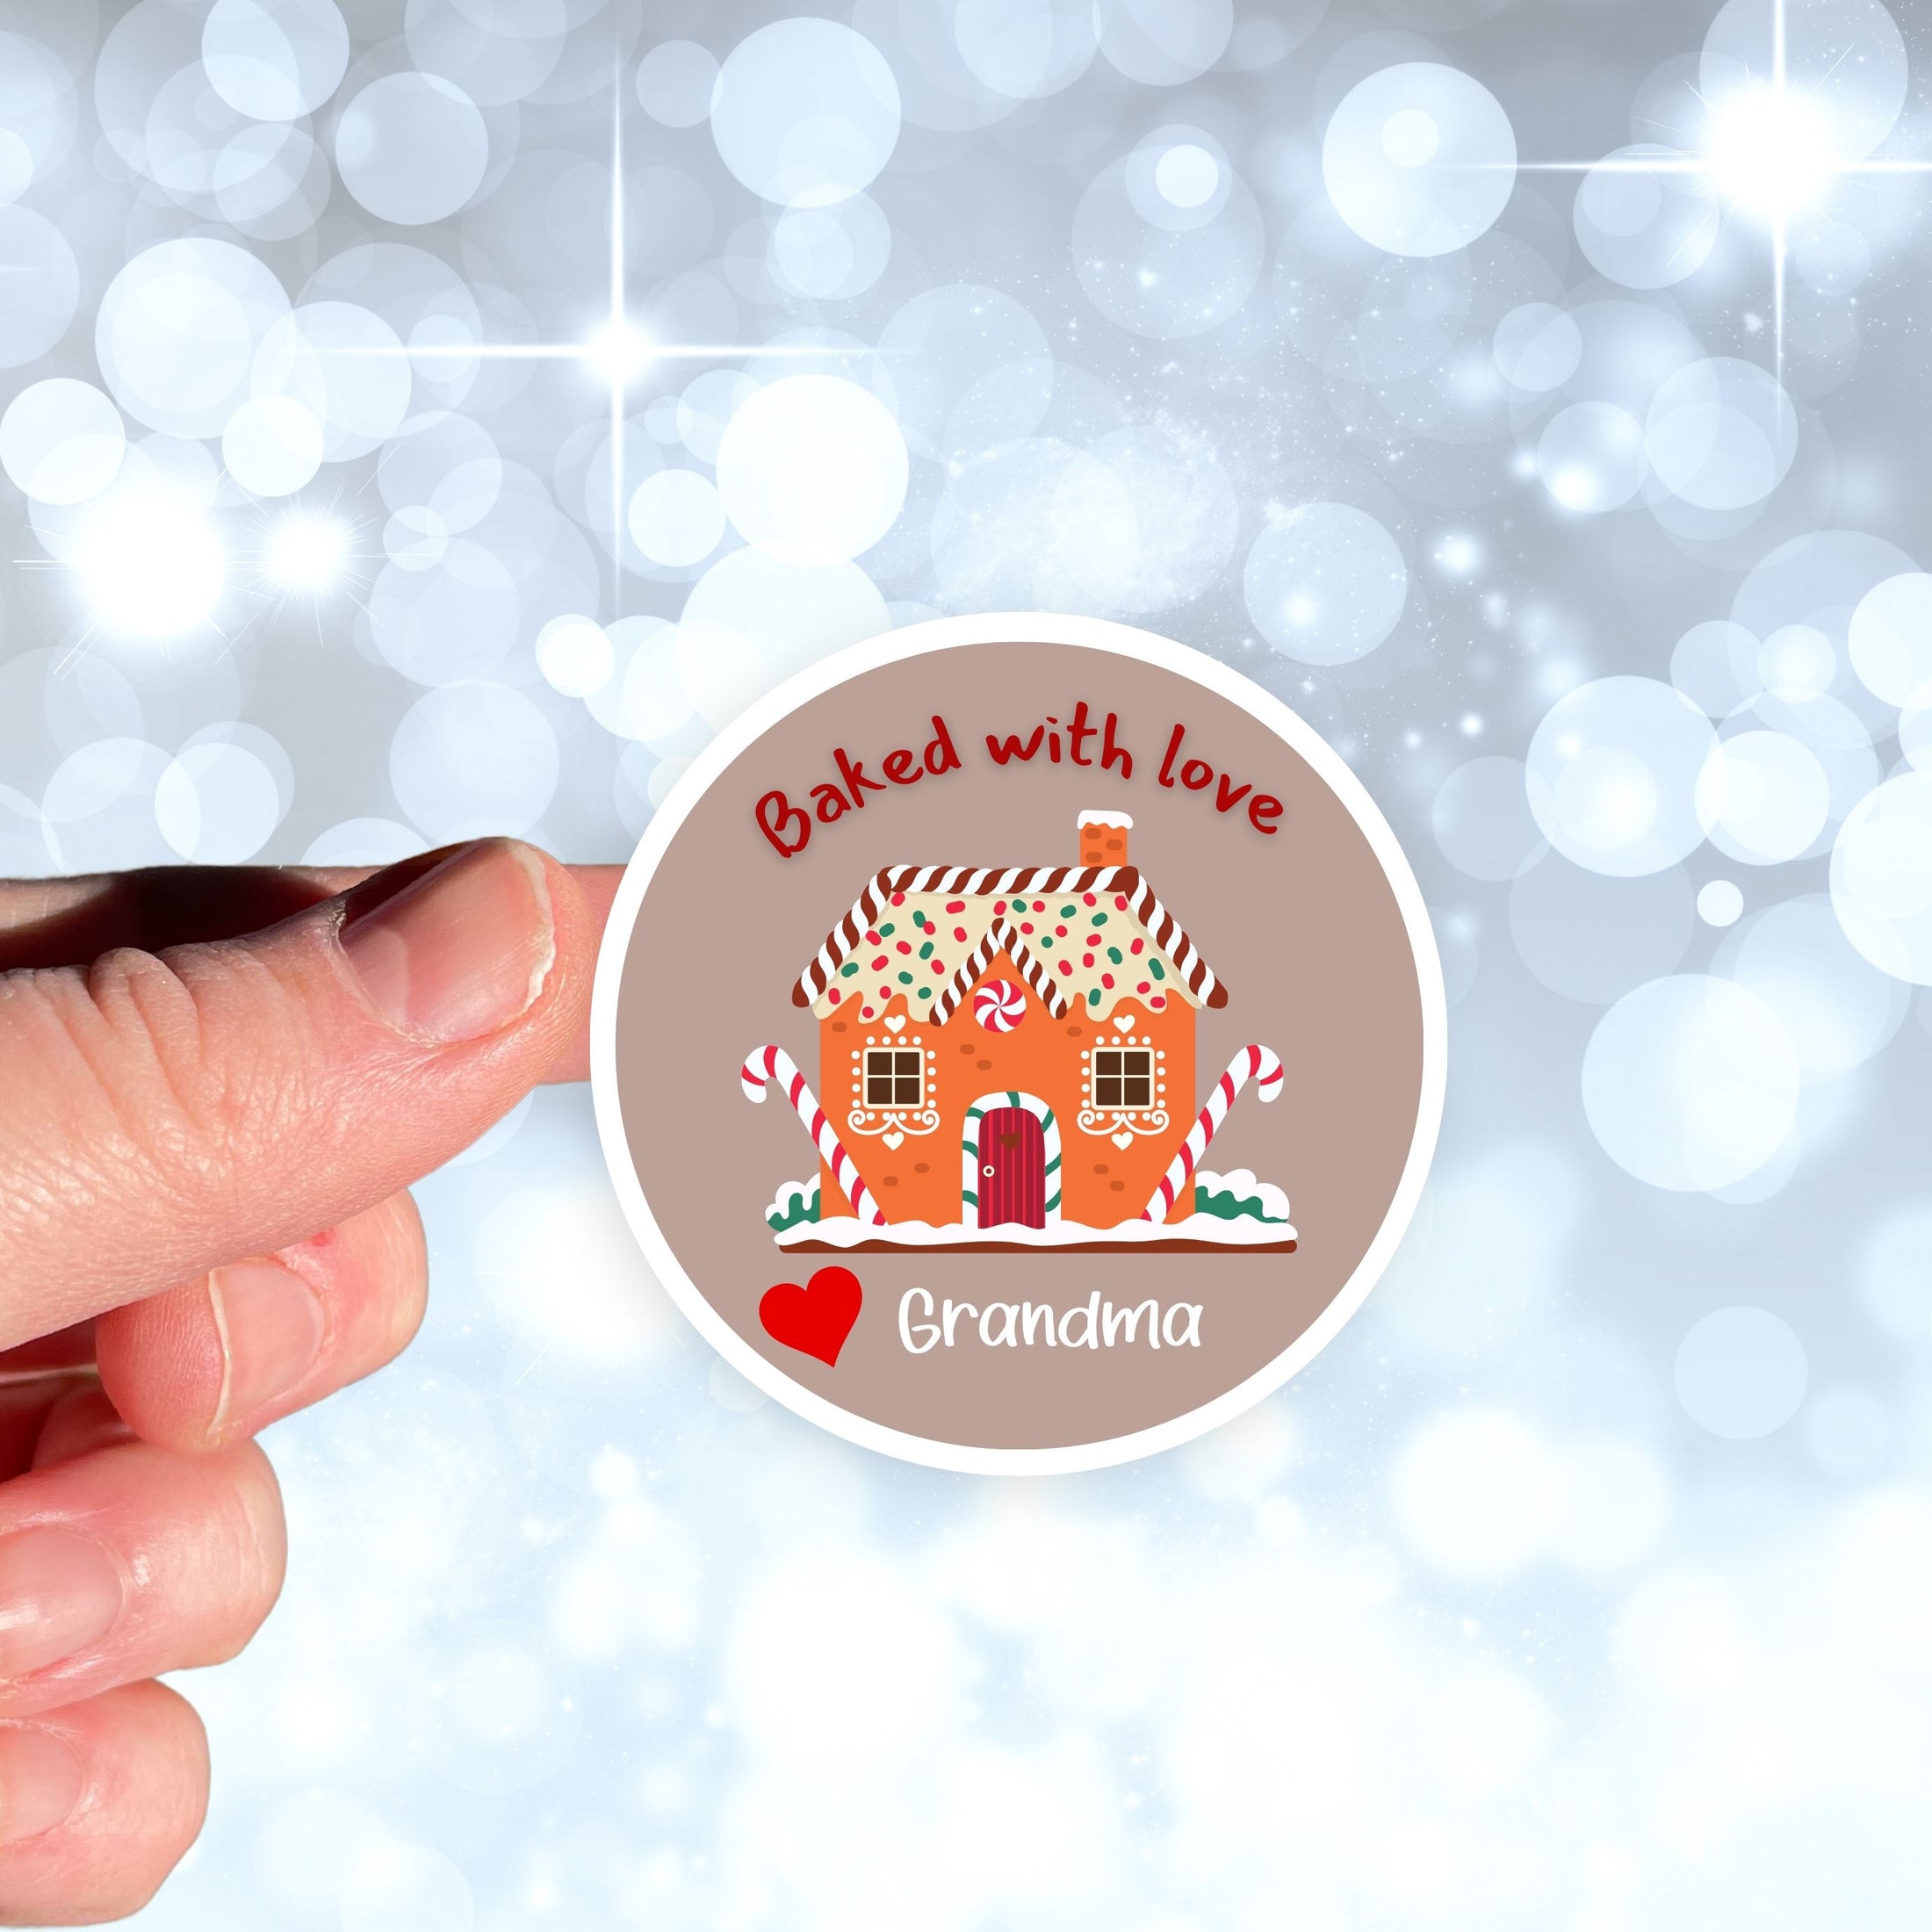  This image shows the personalized holiday sticker being held on one finger over a background of bubbles.